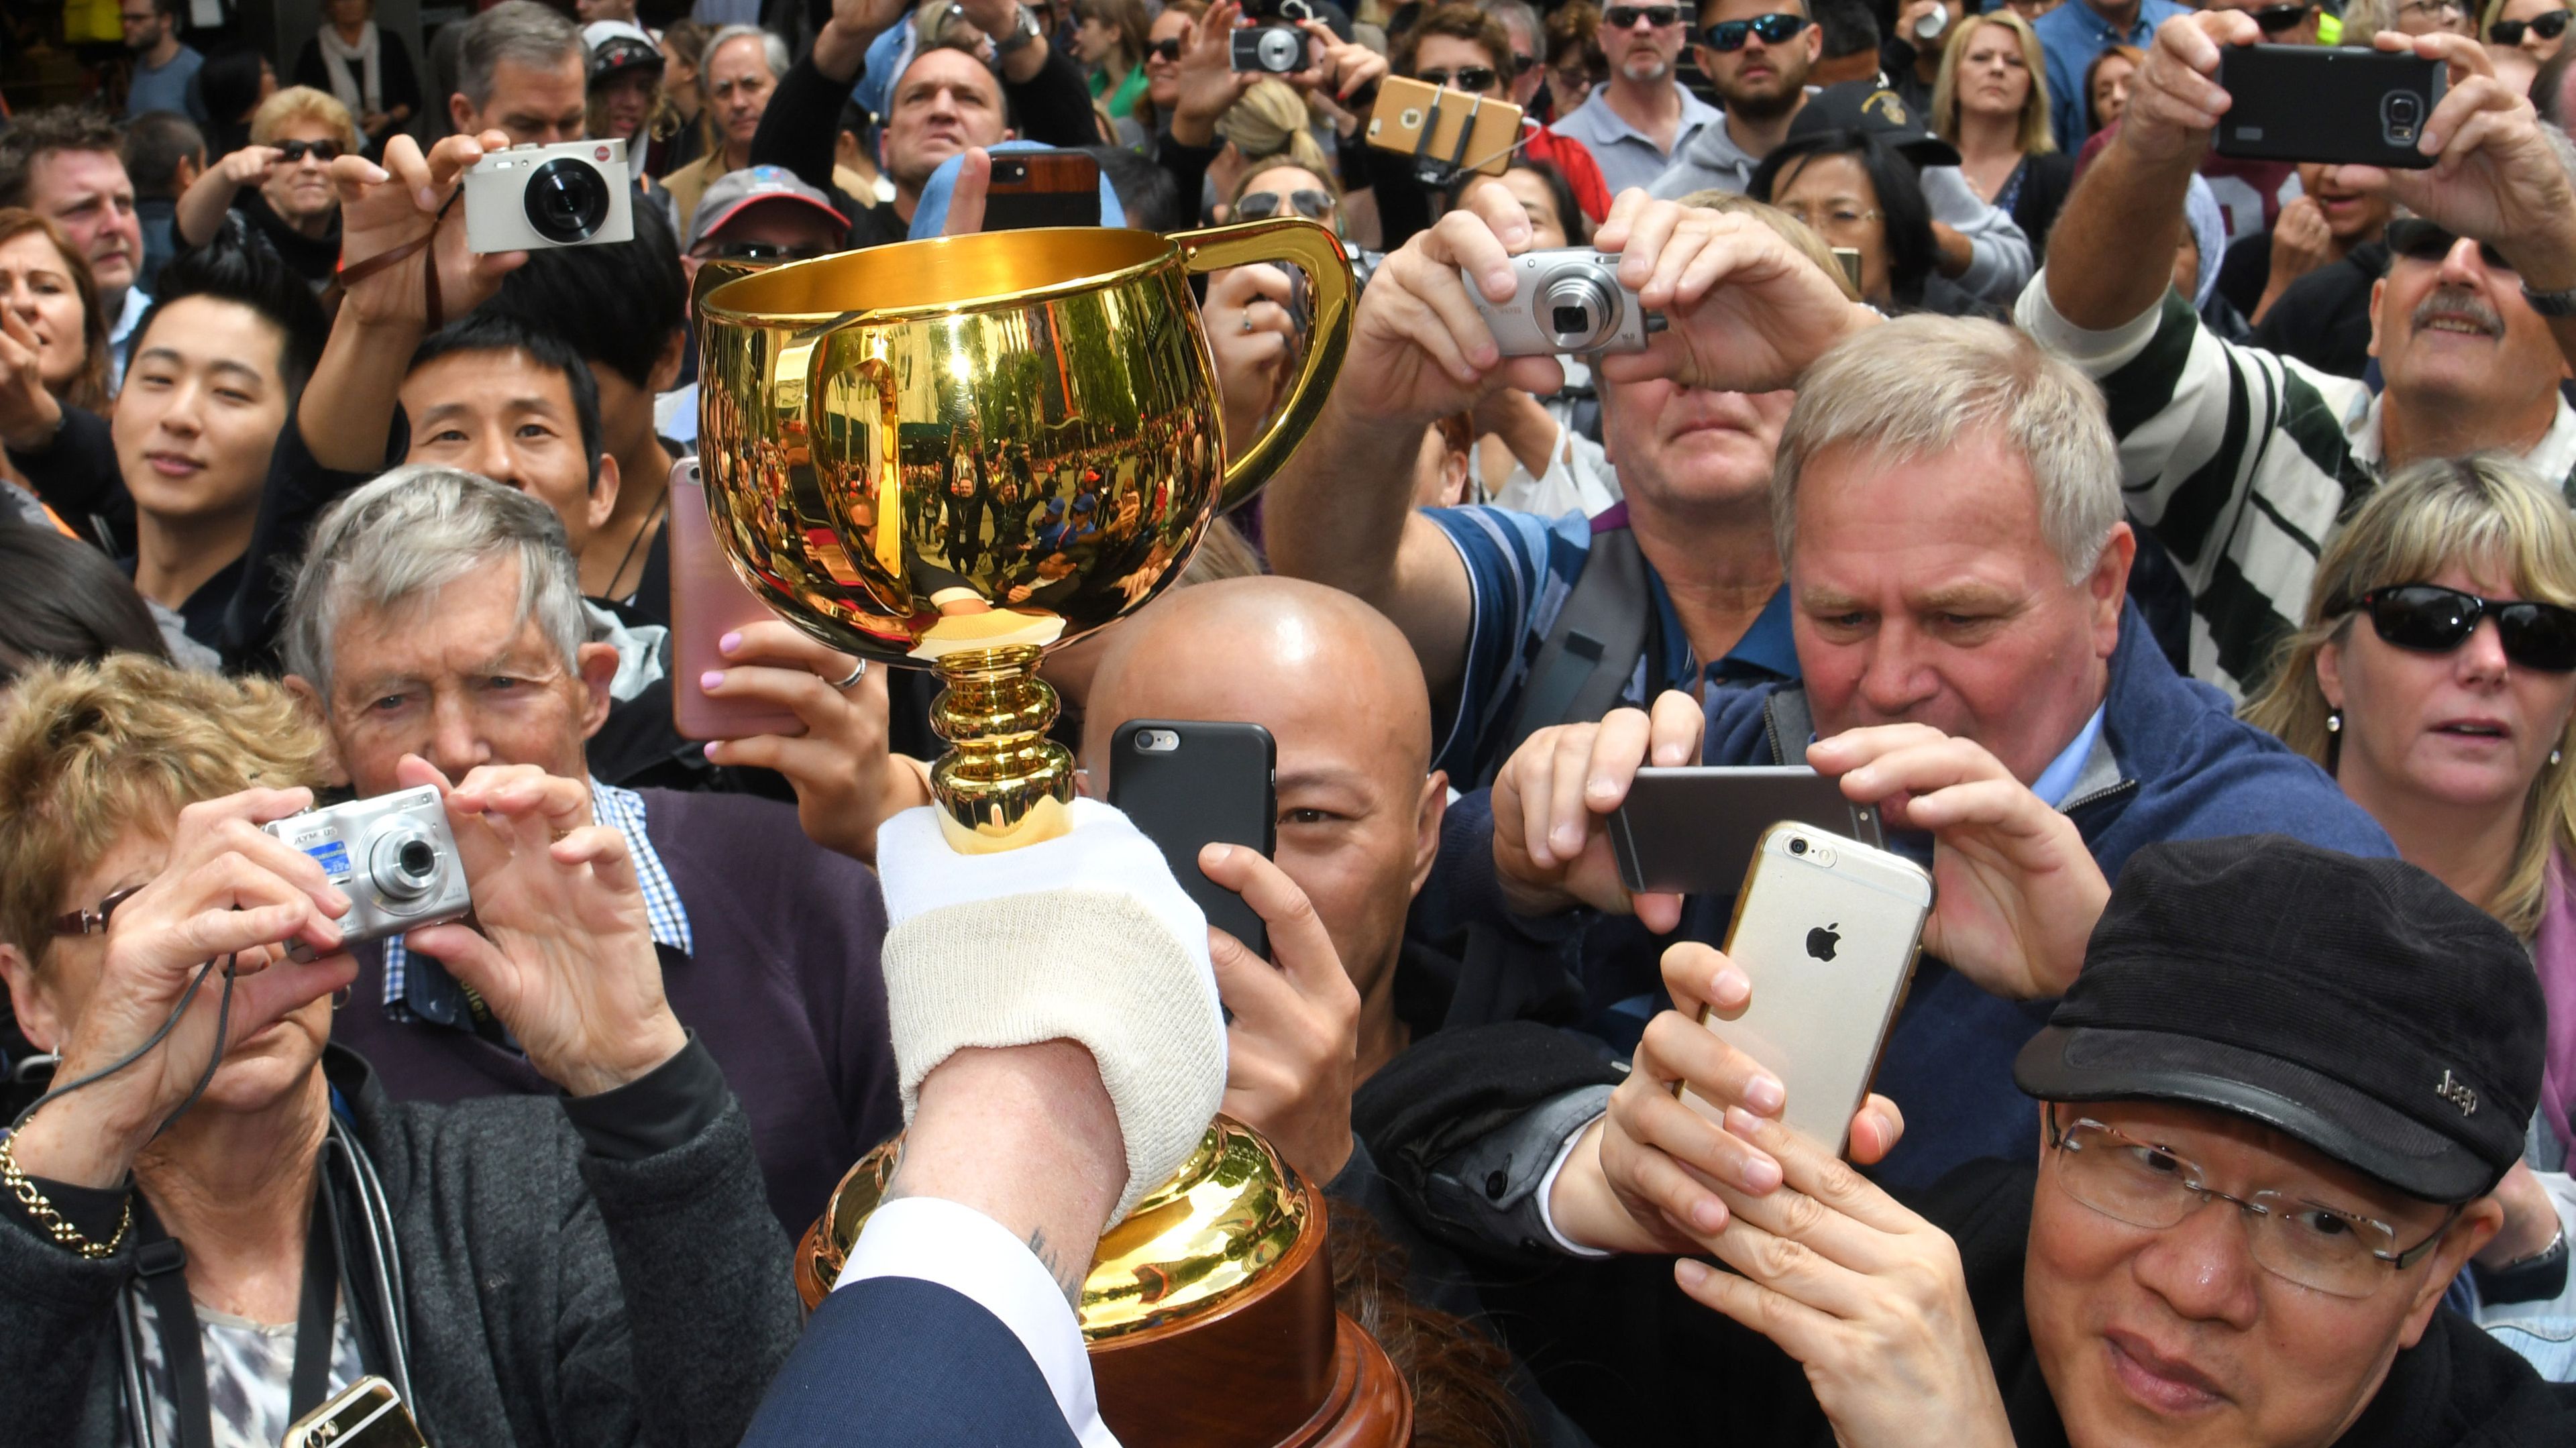 The Melbourne Cup is held into the crowd for fans to take pictures during the 2016 Melbourne Cup Parade on October 31, 2016 in Melbourne, Australia. 